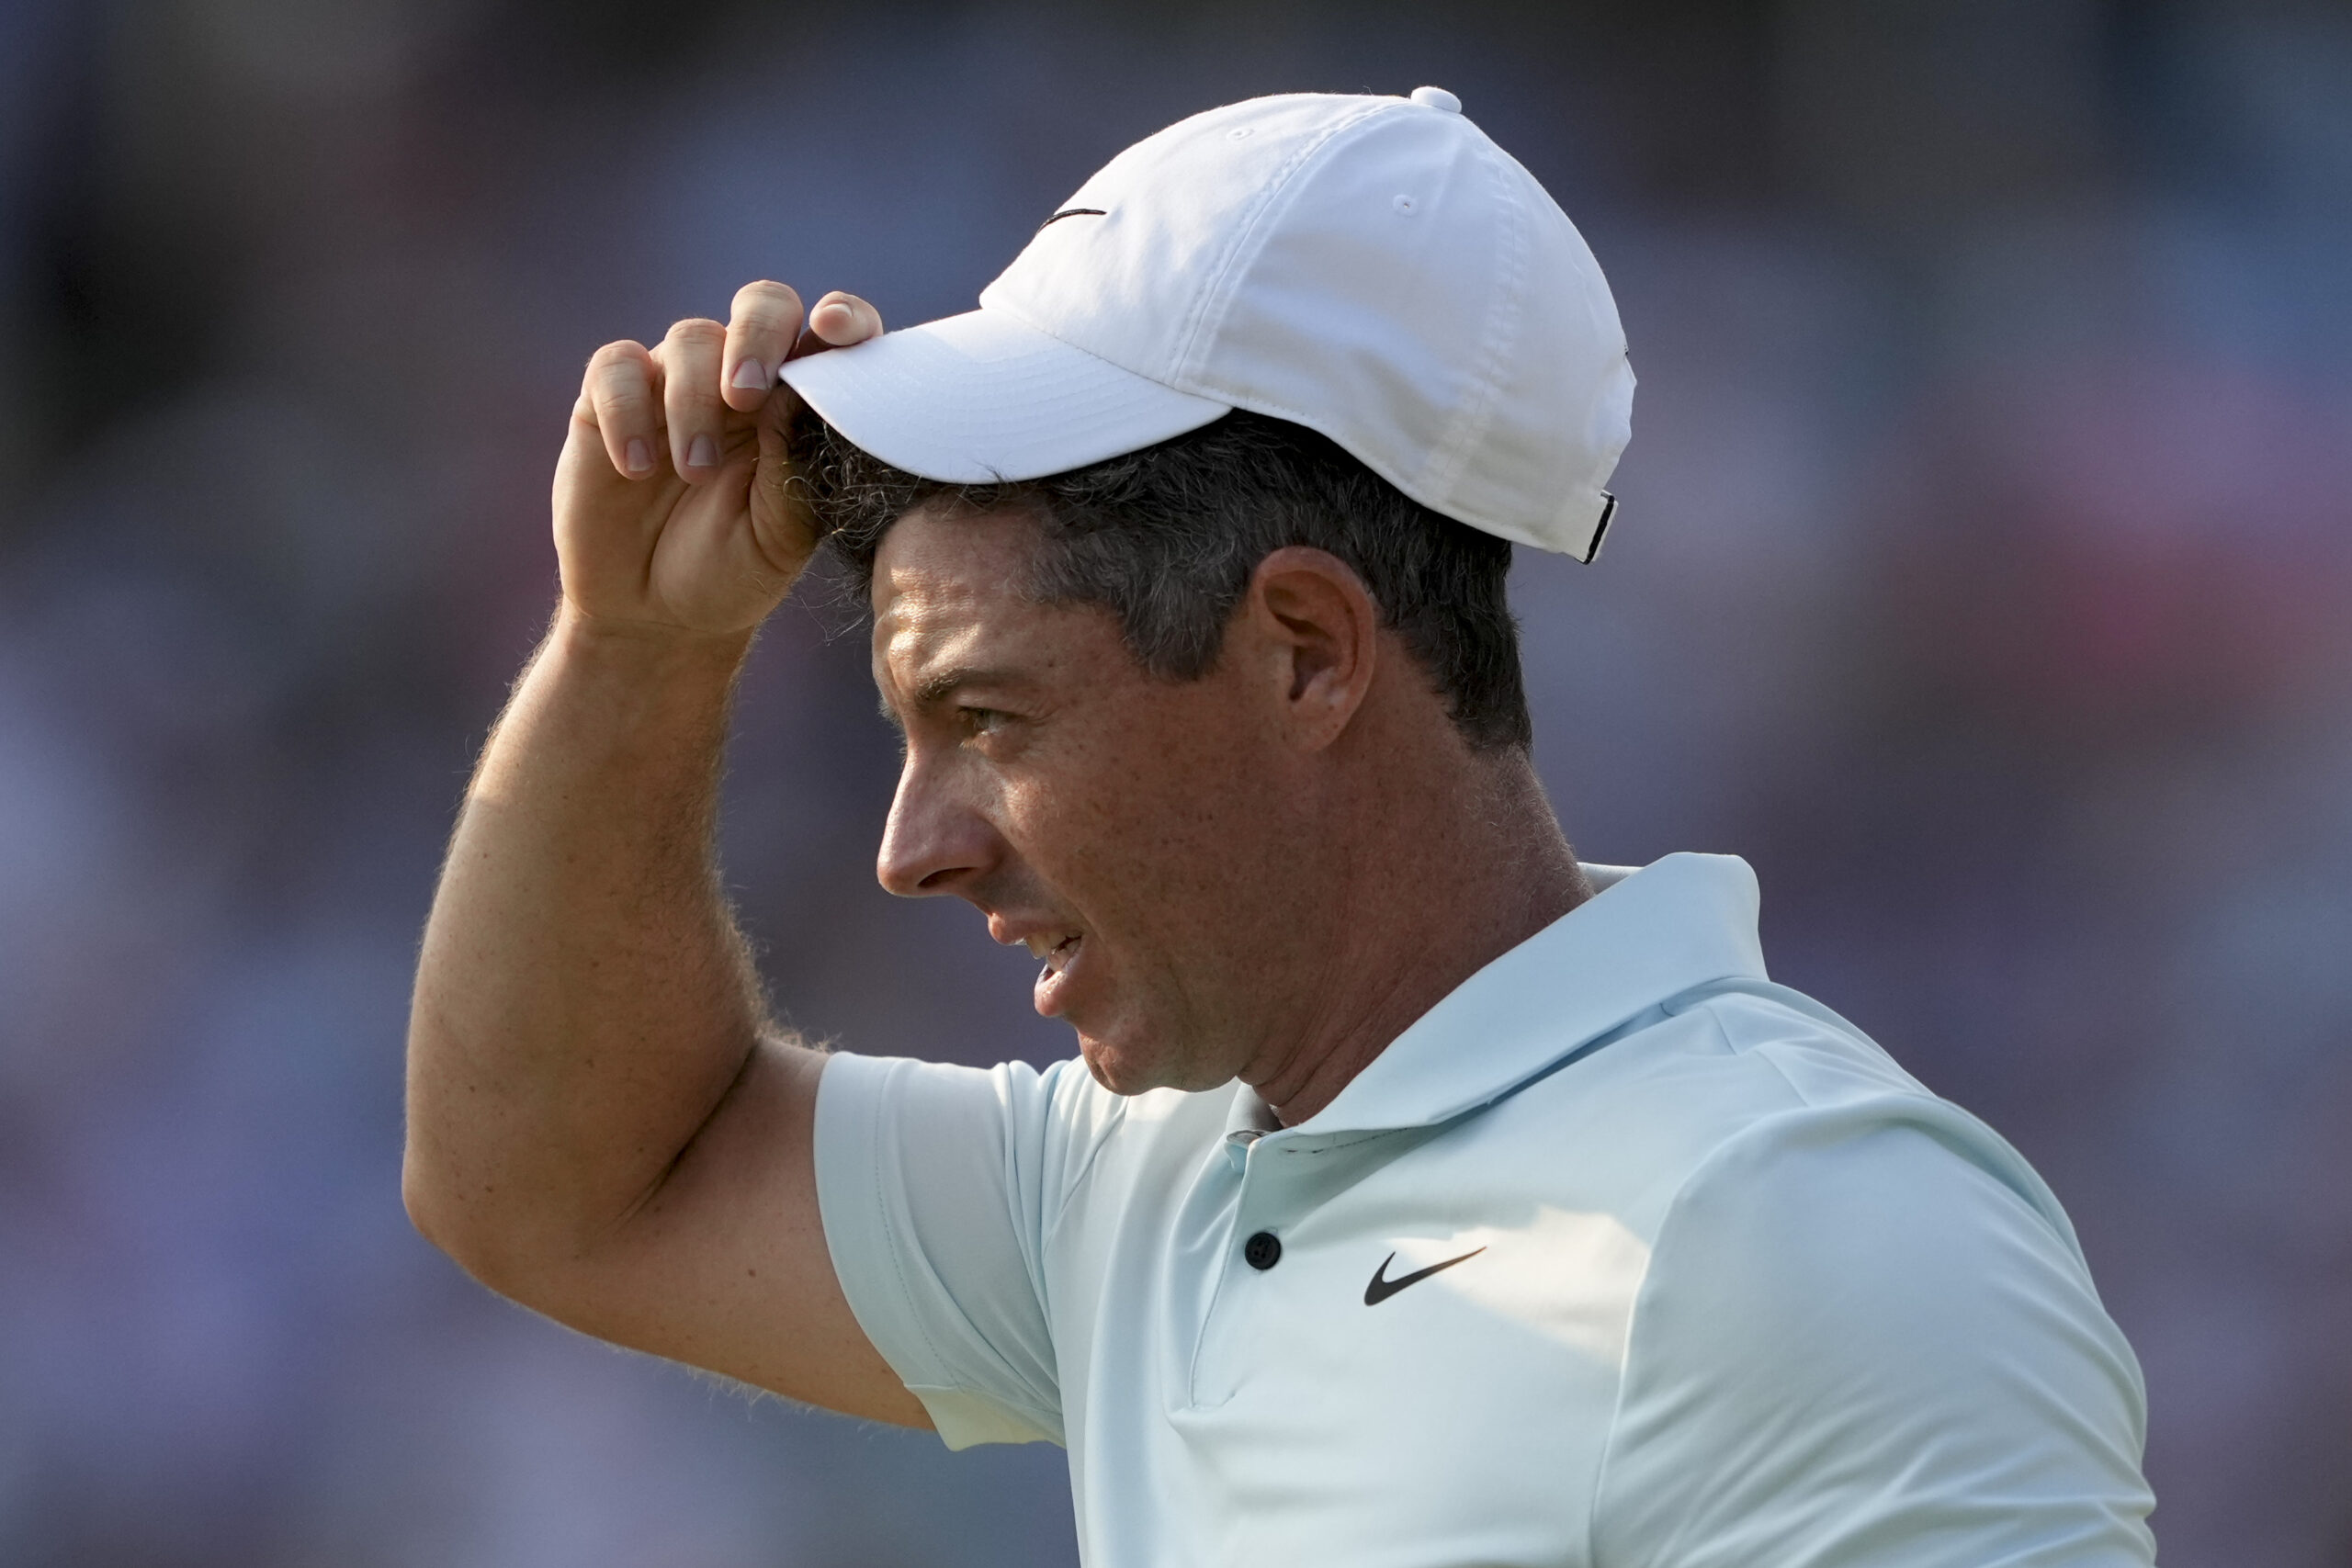 Rory McIlroy takes off his cap